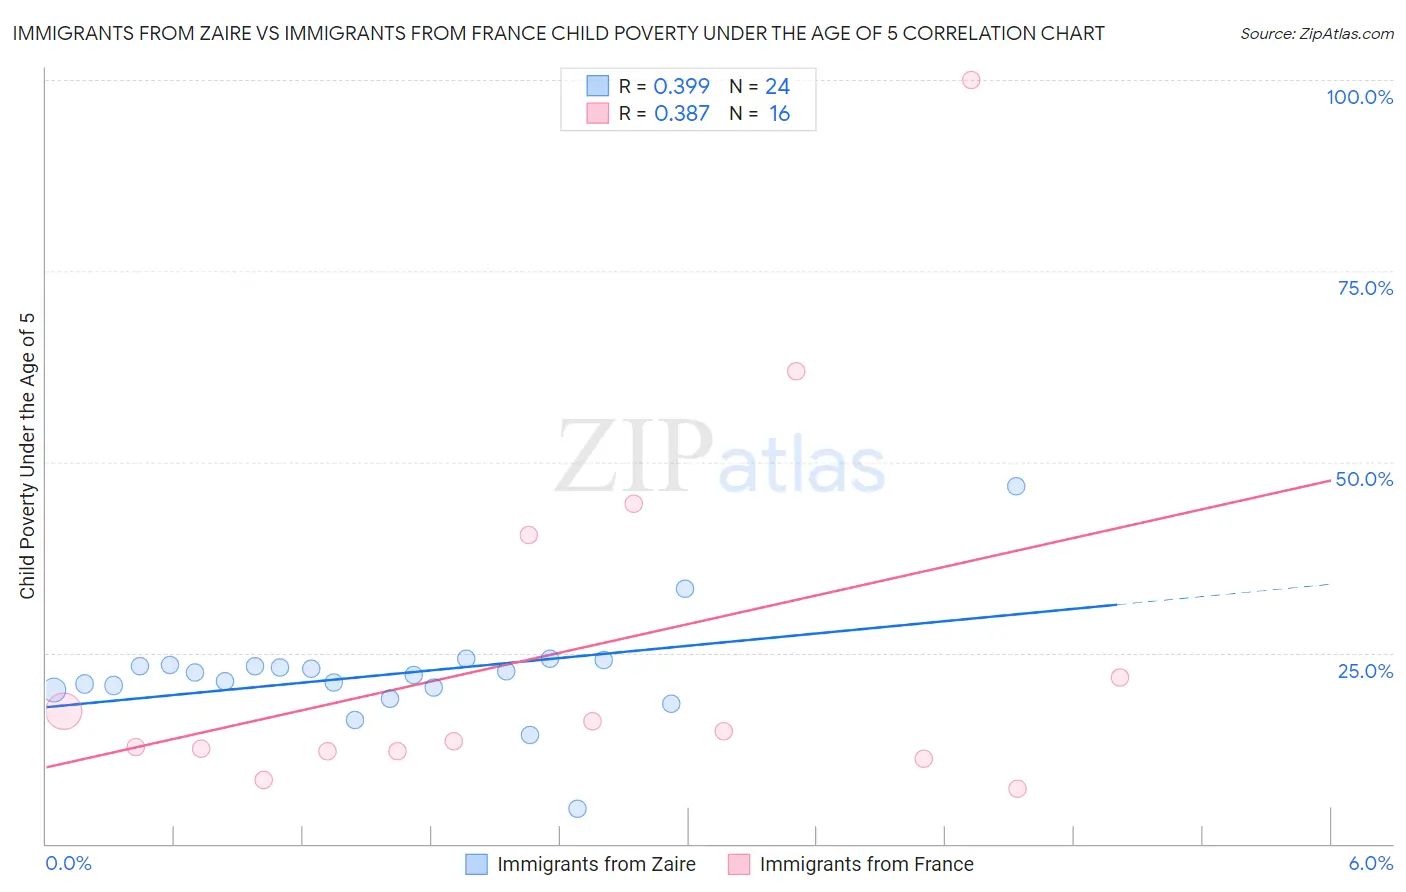 Immigrants from Zaire vs Immigrants from France Child Poverty Under the Age of 5